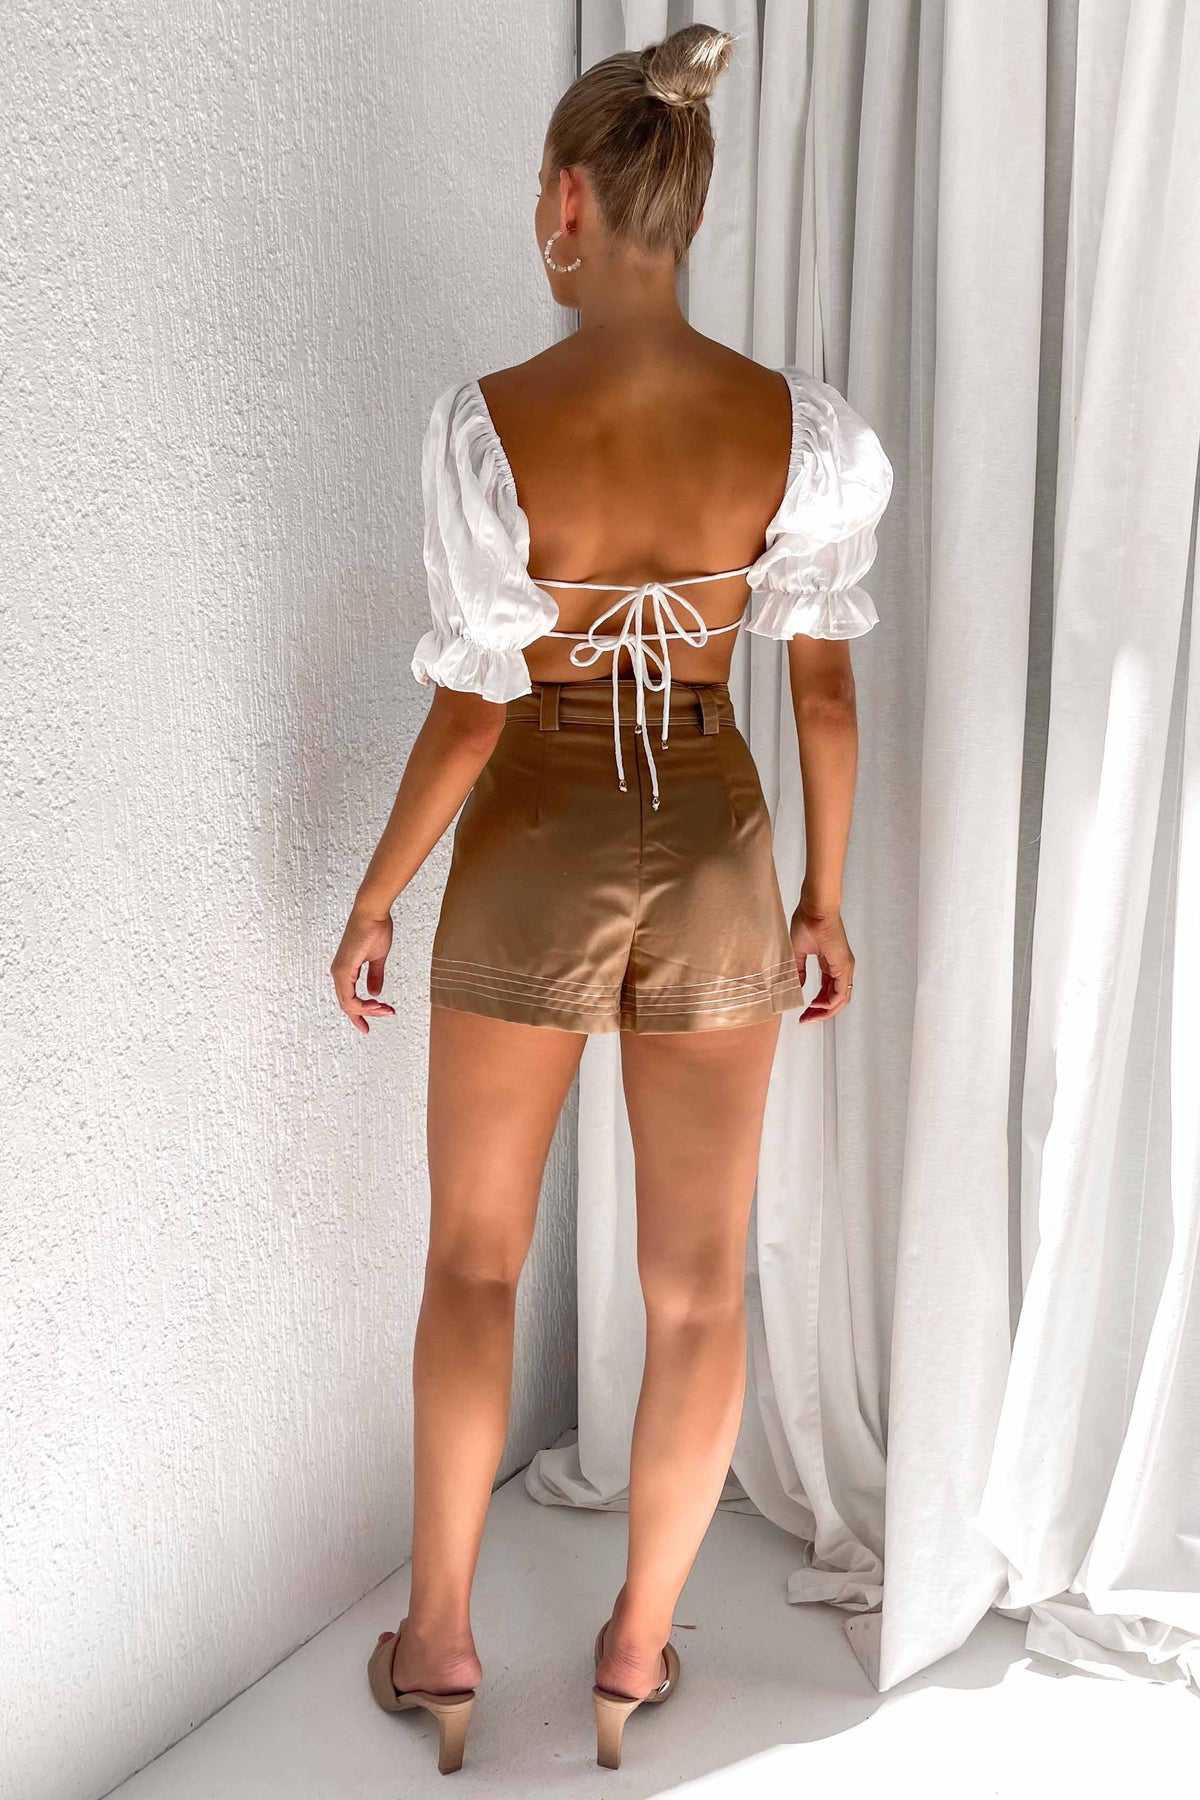 Luvella Shorts, ACCESSORIES, BELT, BELTS, BOTTOMS, BROWN, HIGH WAISTED, HIGH WAISTED SHORTS, new arrivals, POLYESTER &amp; RAYON, POLYESTER AND RAYON, RAYON AND POLYESTER, SHORTS, , -MISHKAH